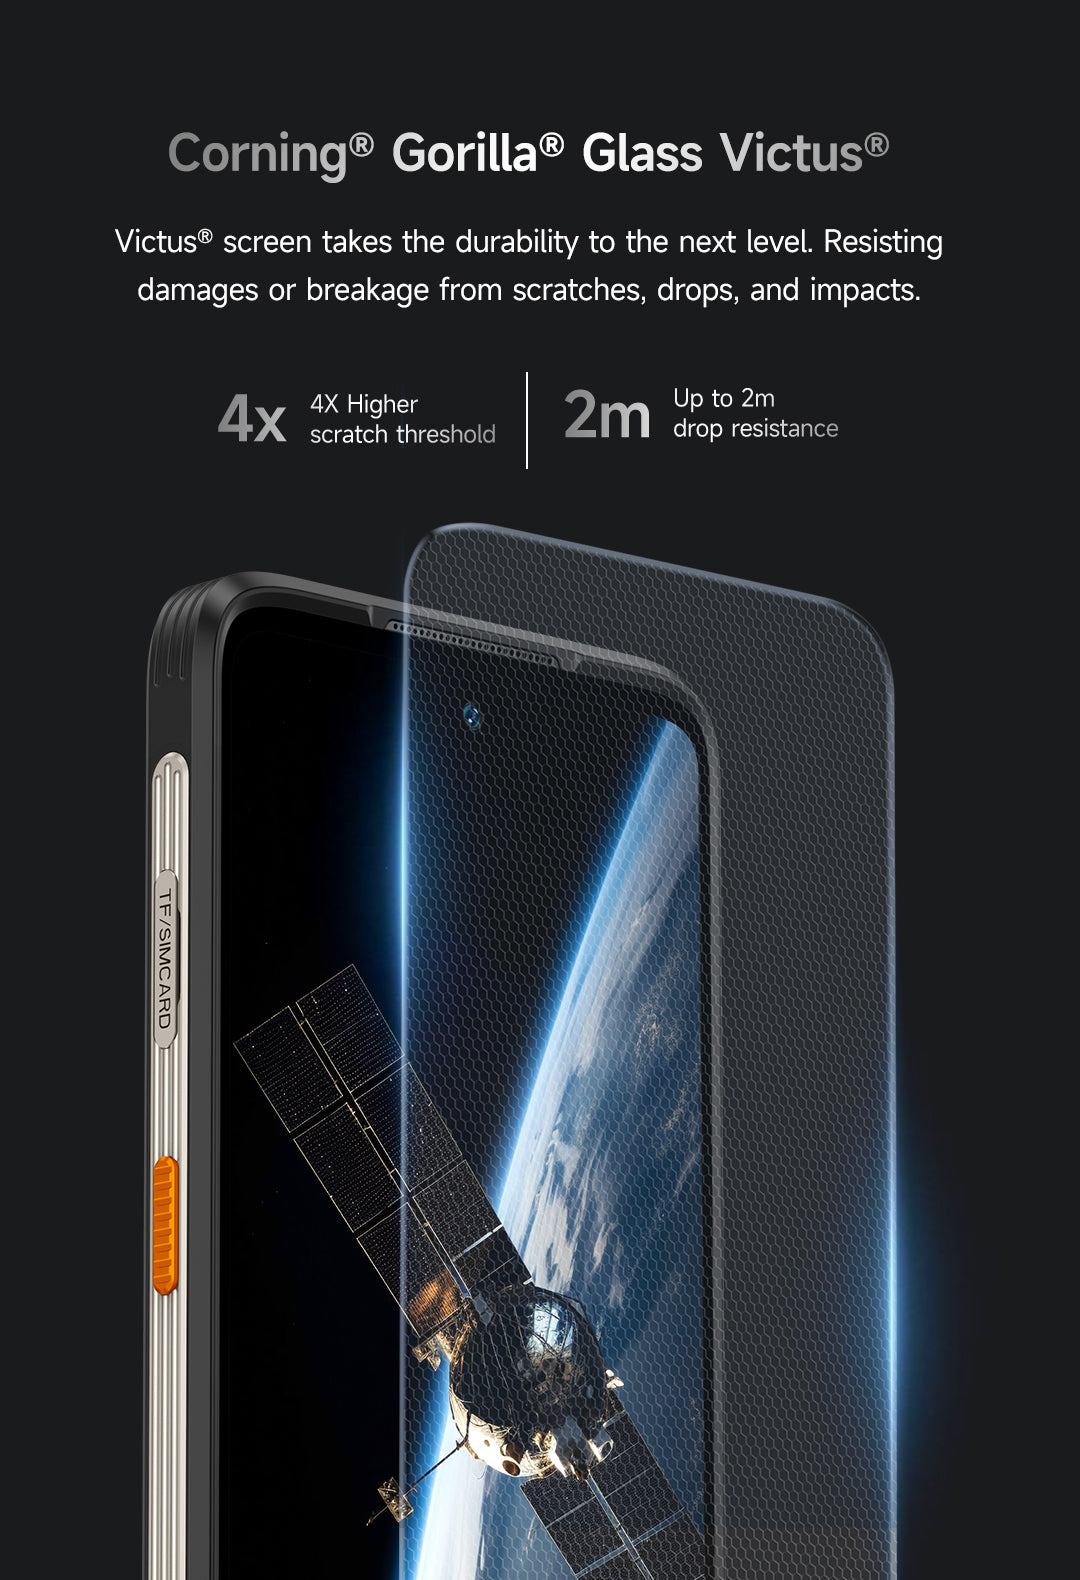 Ulefone Armor 23 Ultra - Full phone specifications